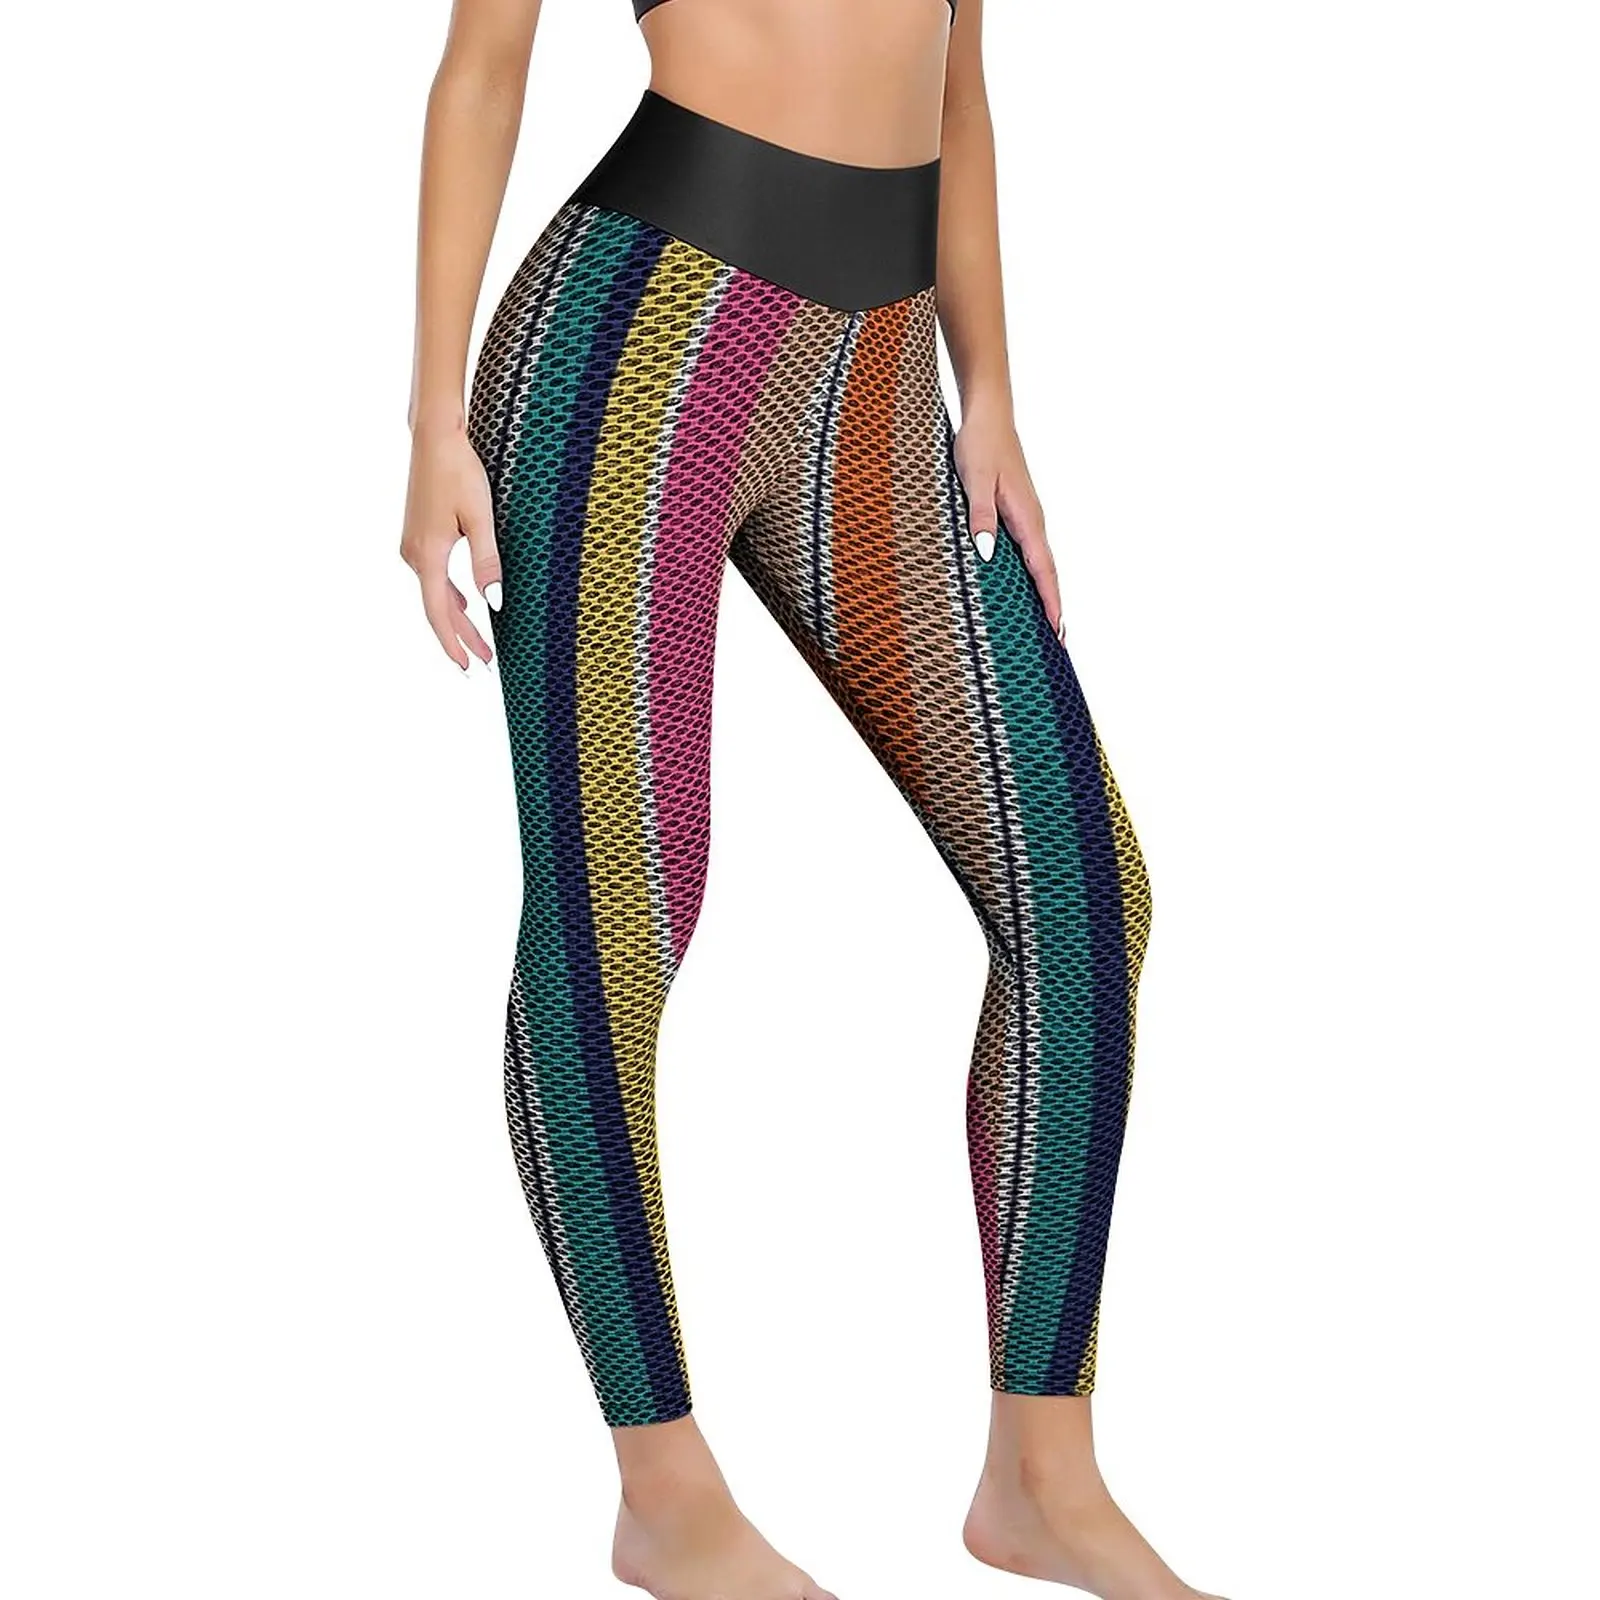 Bright Striped Leggings Sexy Colorful Stripes Print Fitness Yoga Pants Push Up Quick-Dry Sports Tights Vintage Graphic Leggins